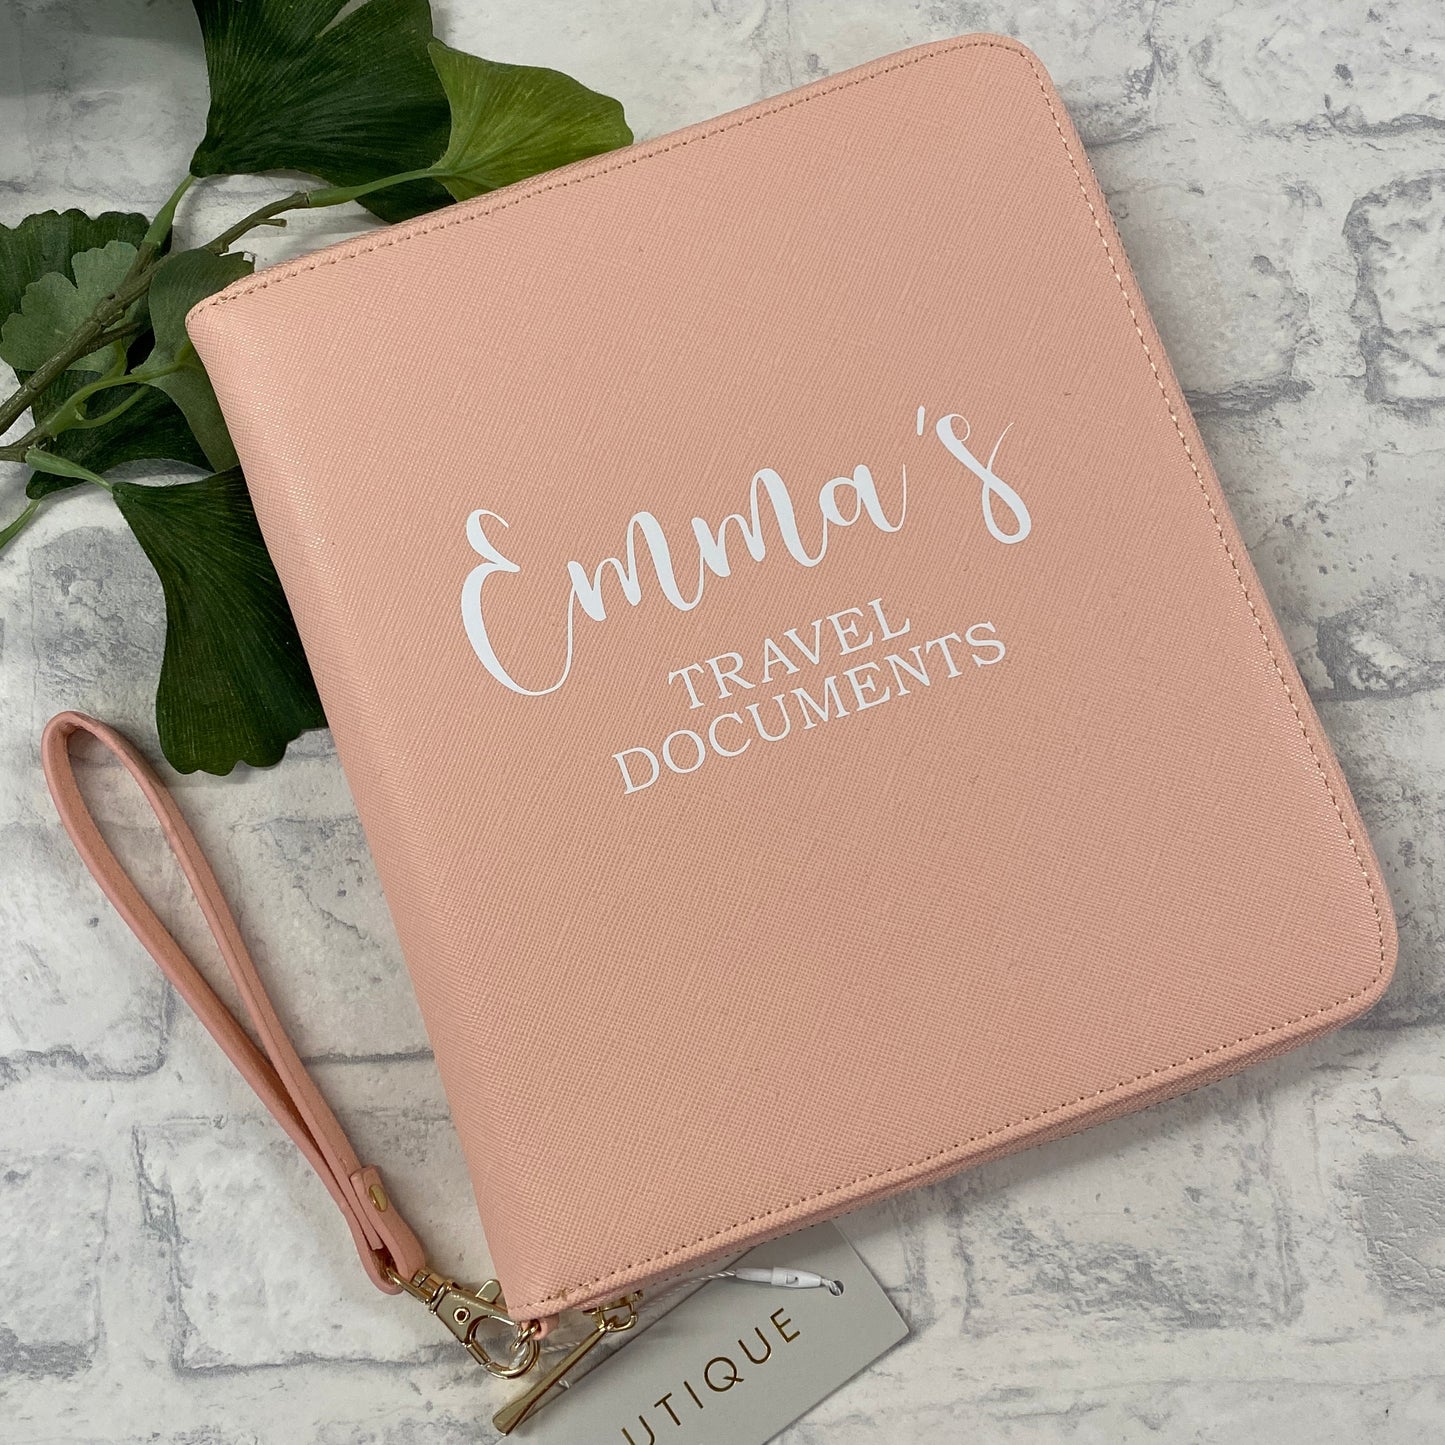 Personalised Boutique Travel Document Holder